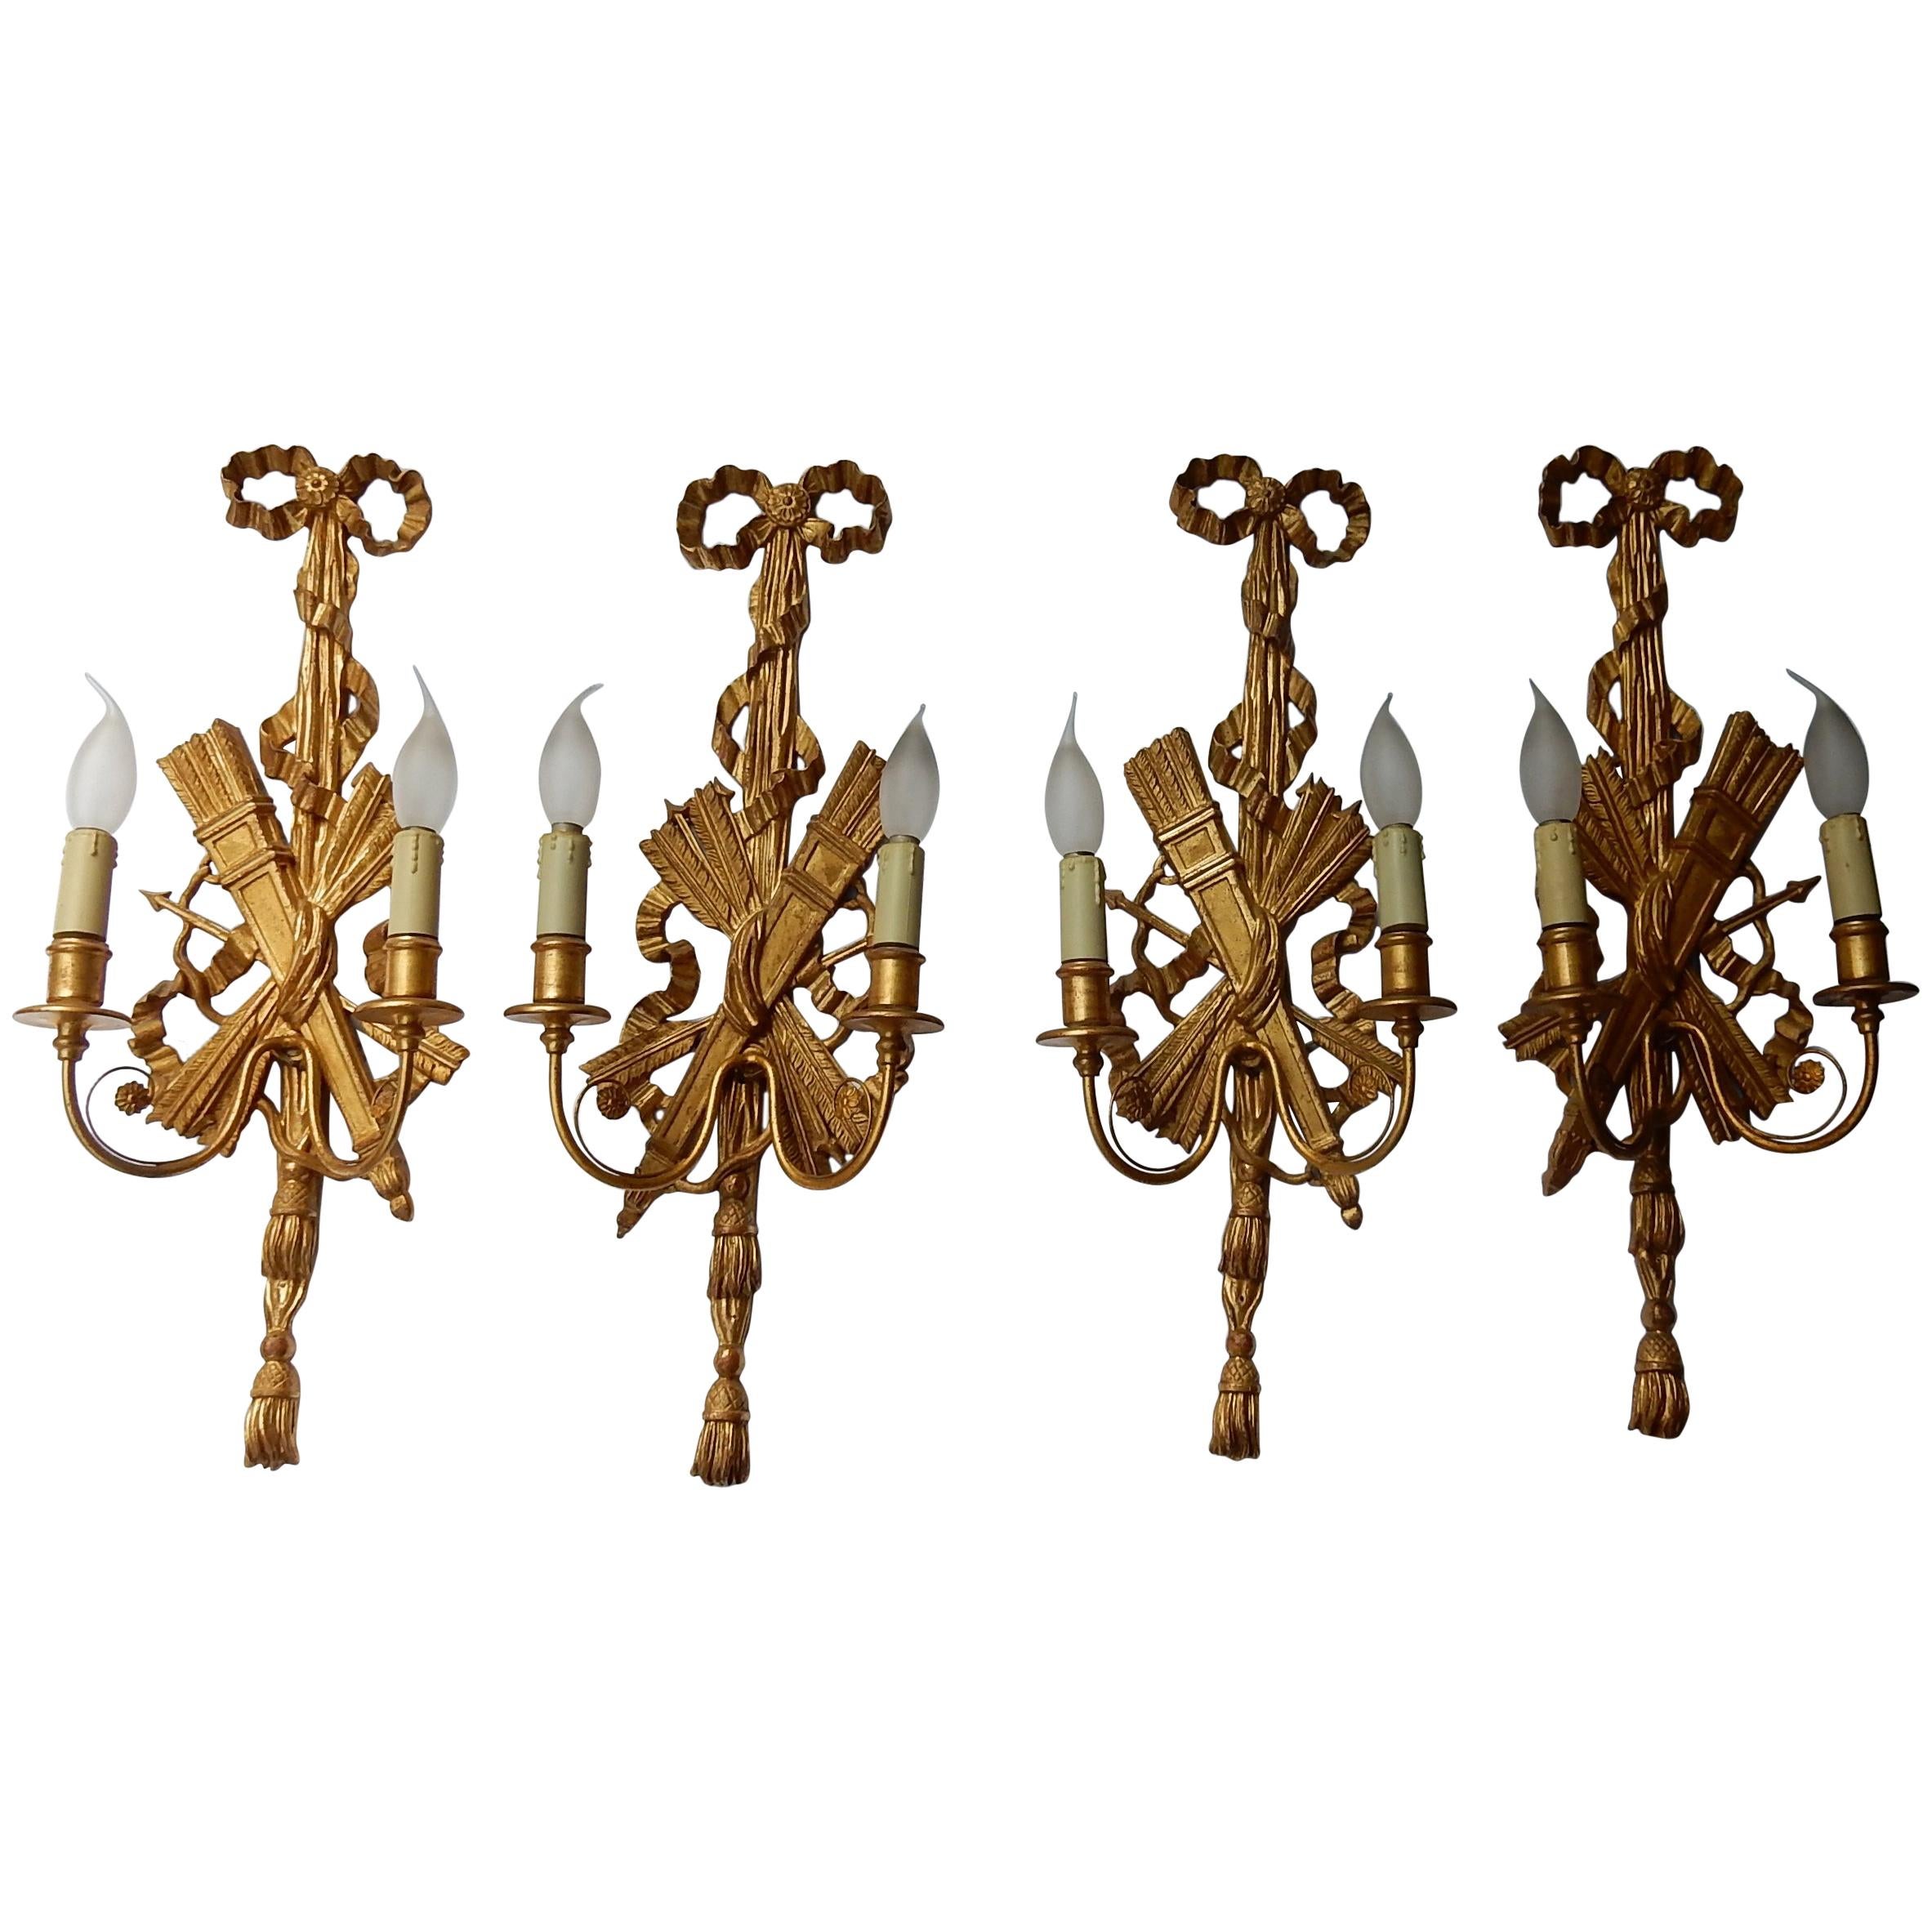 2 Pair of Sconces, Golden Wood and Golden Iron Attributes with Arrows, 1950-1970 For Sale